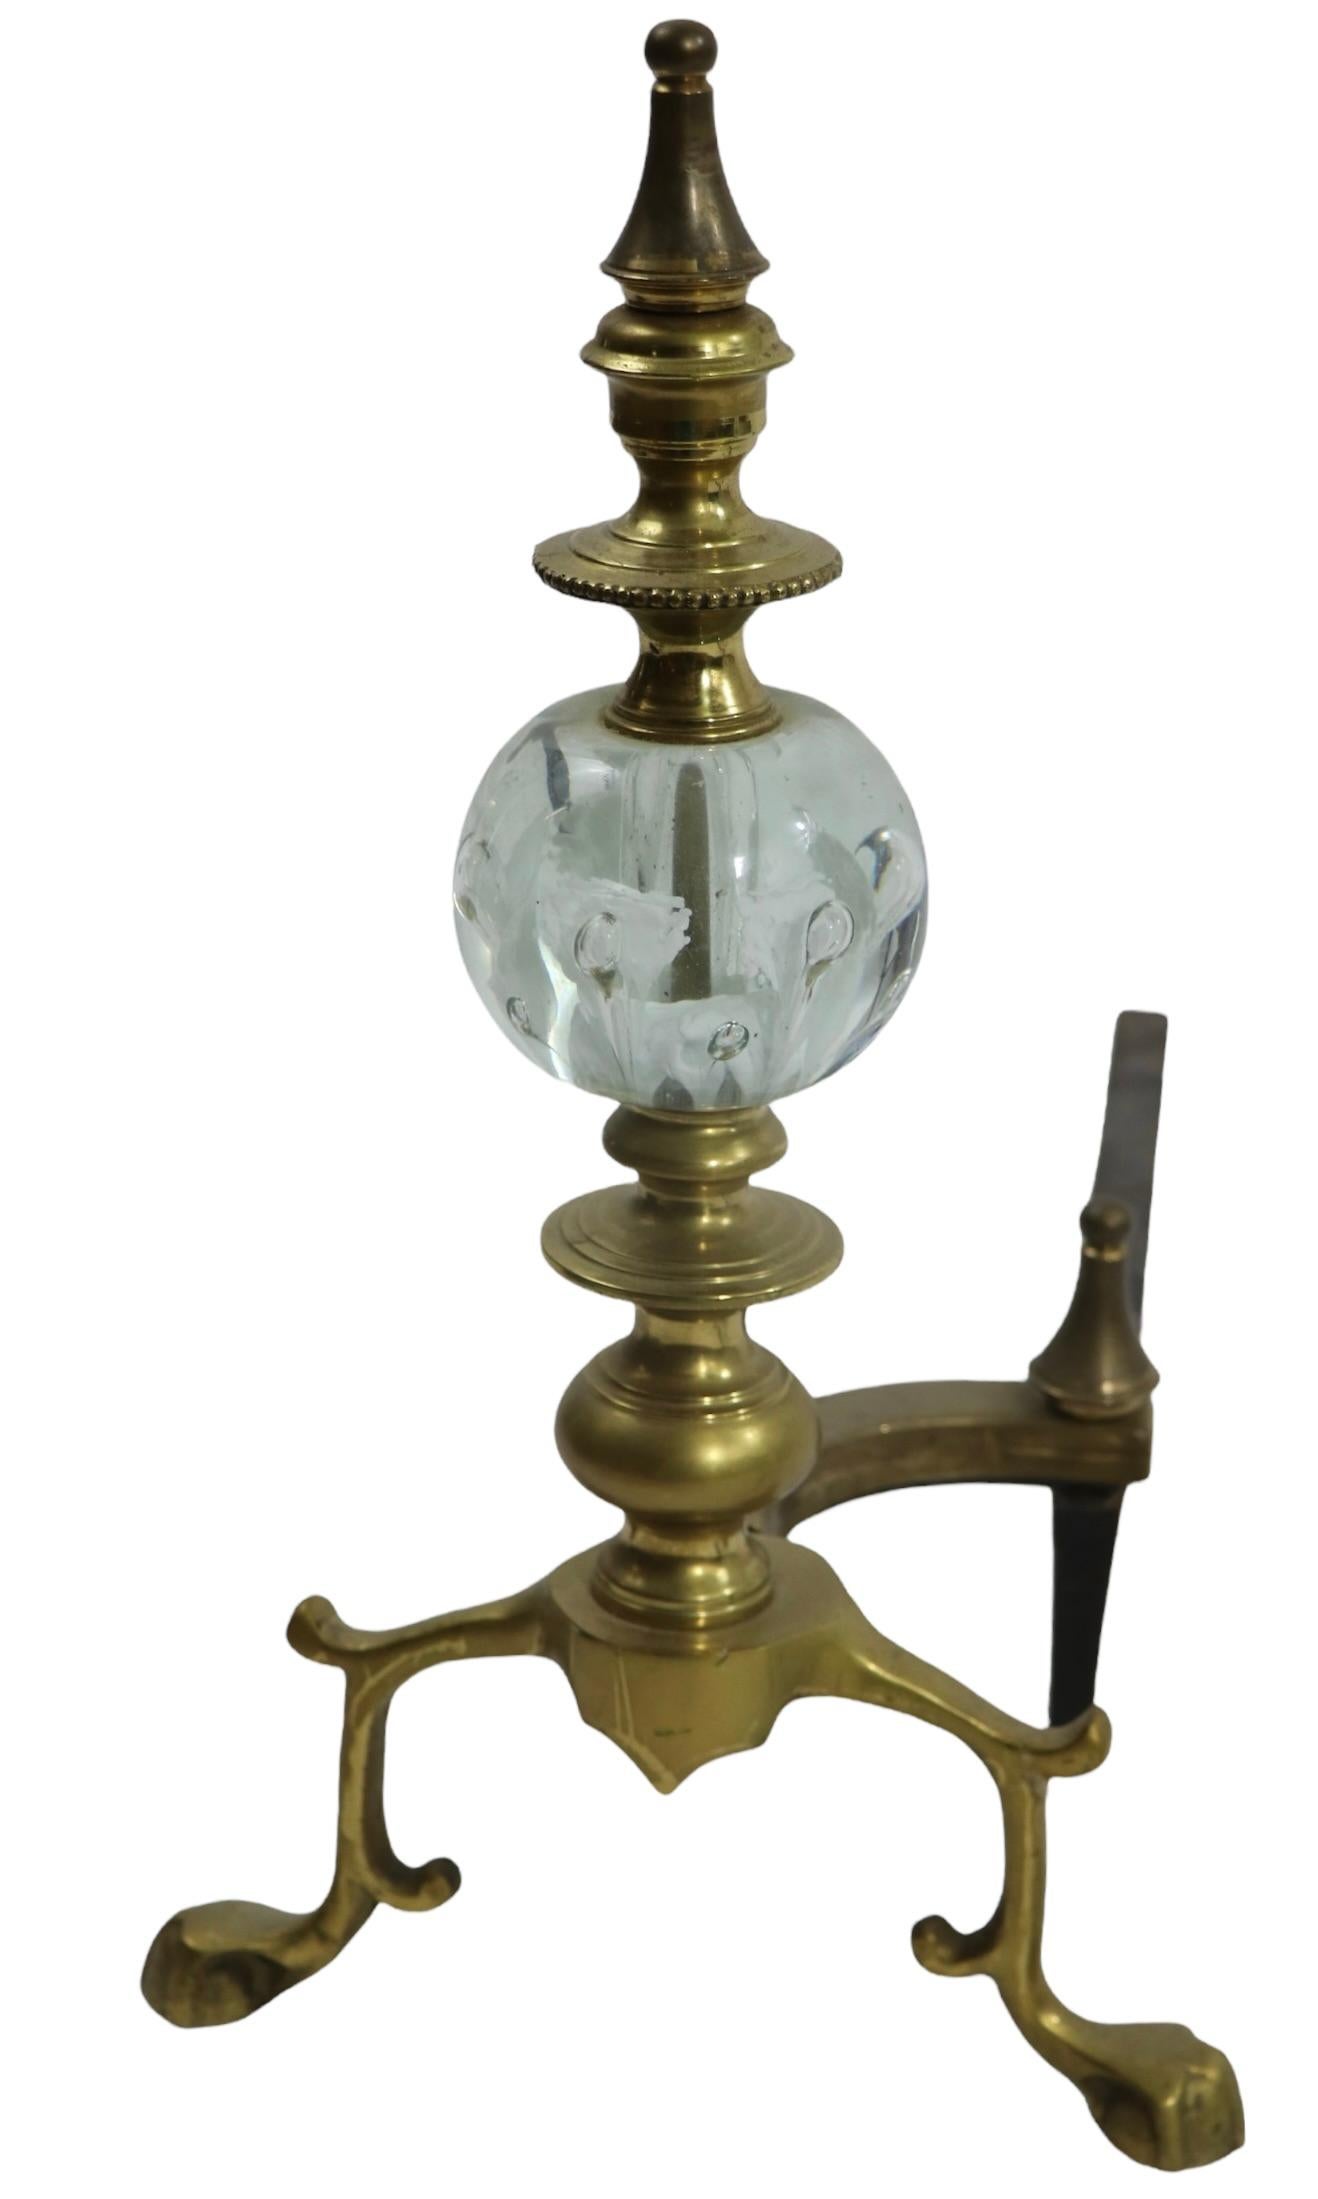 Exceptional pair of andirons by noted and sought after maker, St. Clair. The andirons feature a stunning art glass paperweight ball with interior white flowers, mounted on solid brass stems, and feet. The pair is in very fine, original, clean and